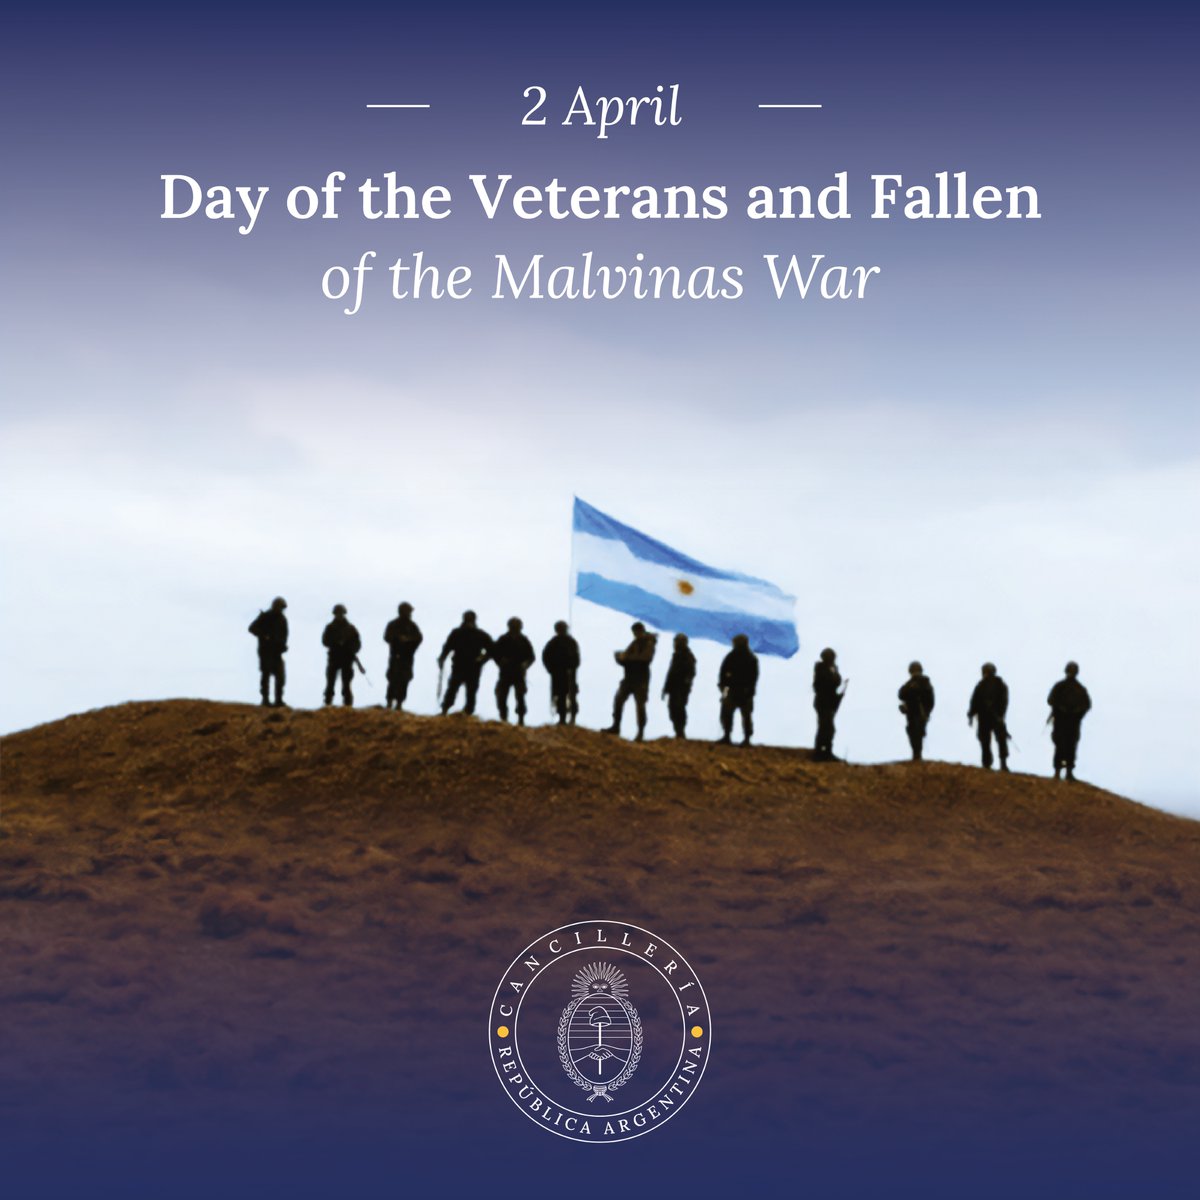 2 April - We commemorate today the Day of Veterans and Fallen of the Malvinas War. The best tribute is to work tirelessly to recover the full exercise of sovereignty over the Islands through peace, dialogue, diplomacy and respect for international law.